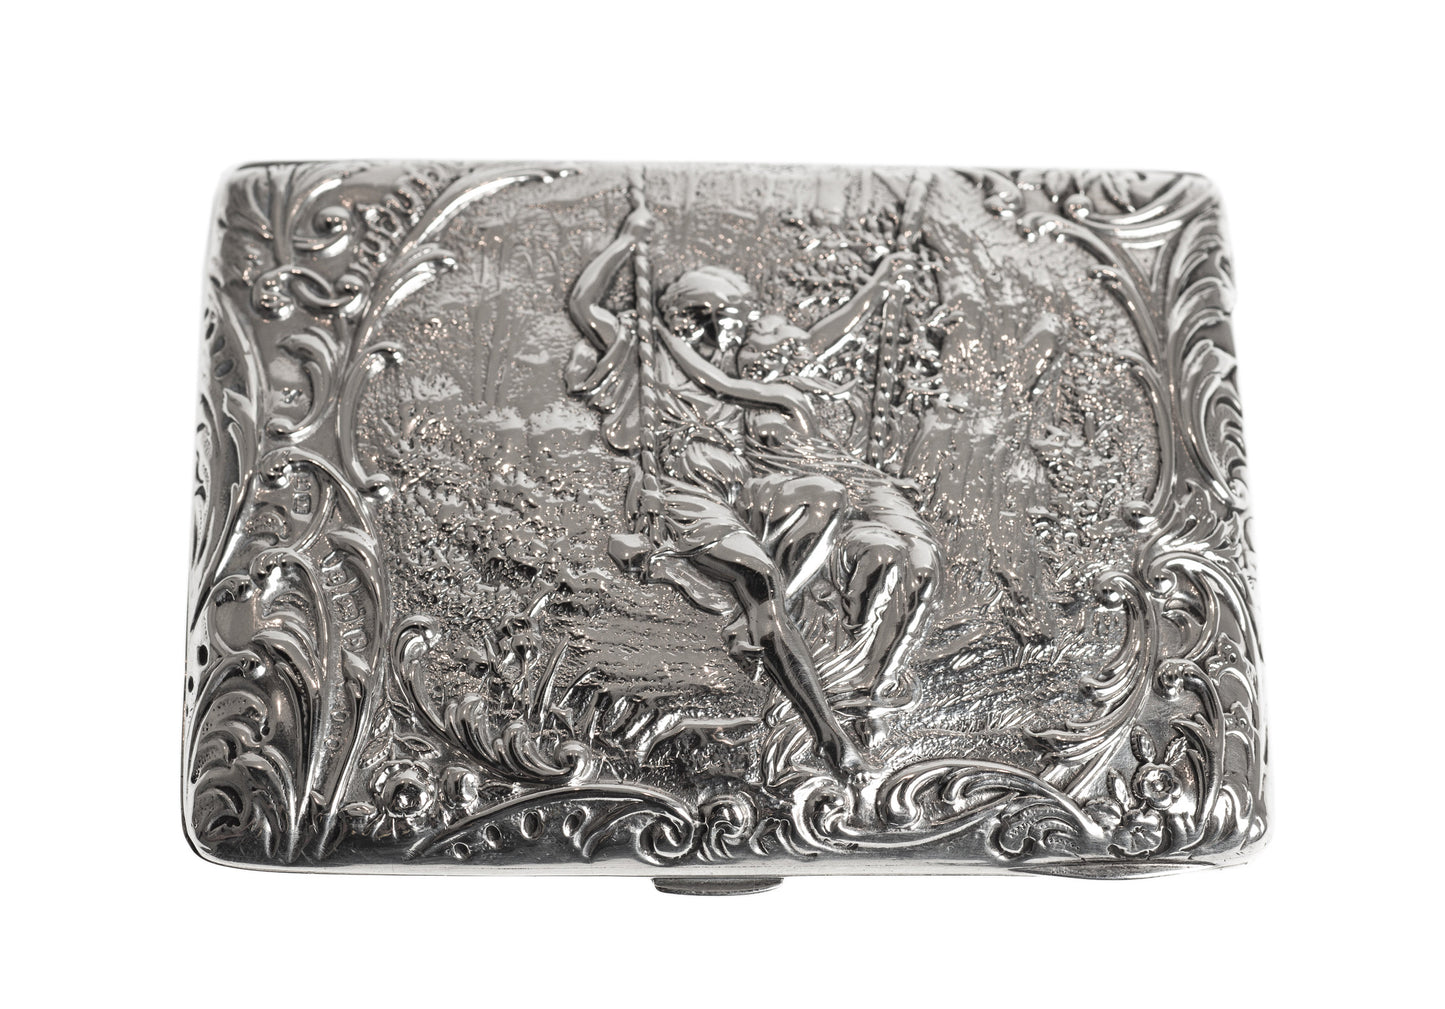 Fine Antique Silver Card Case / Purse Pictorial with Lovers on Swing Silk Lined (Code 2327)